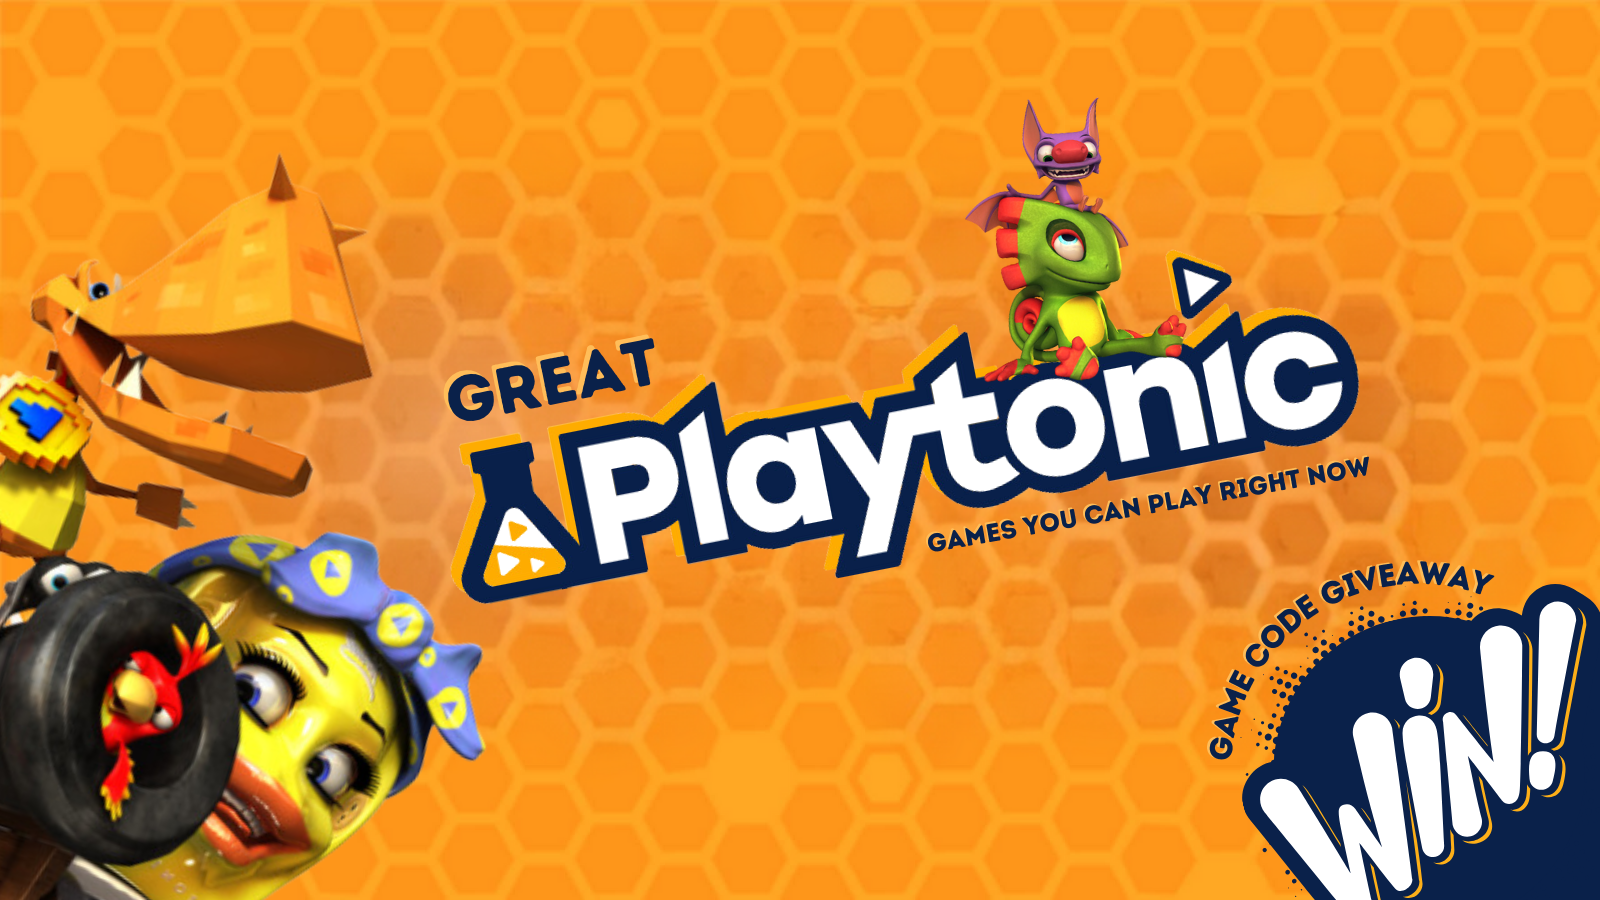 Great Playtonic Games You Can Play Right Now! 